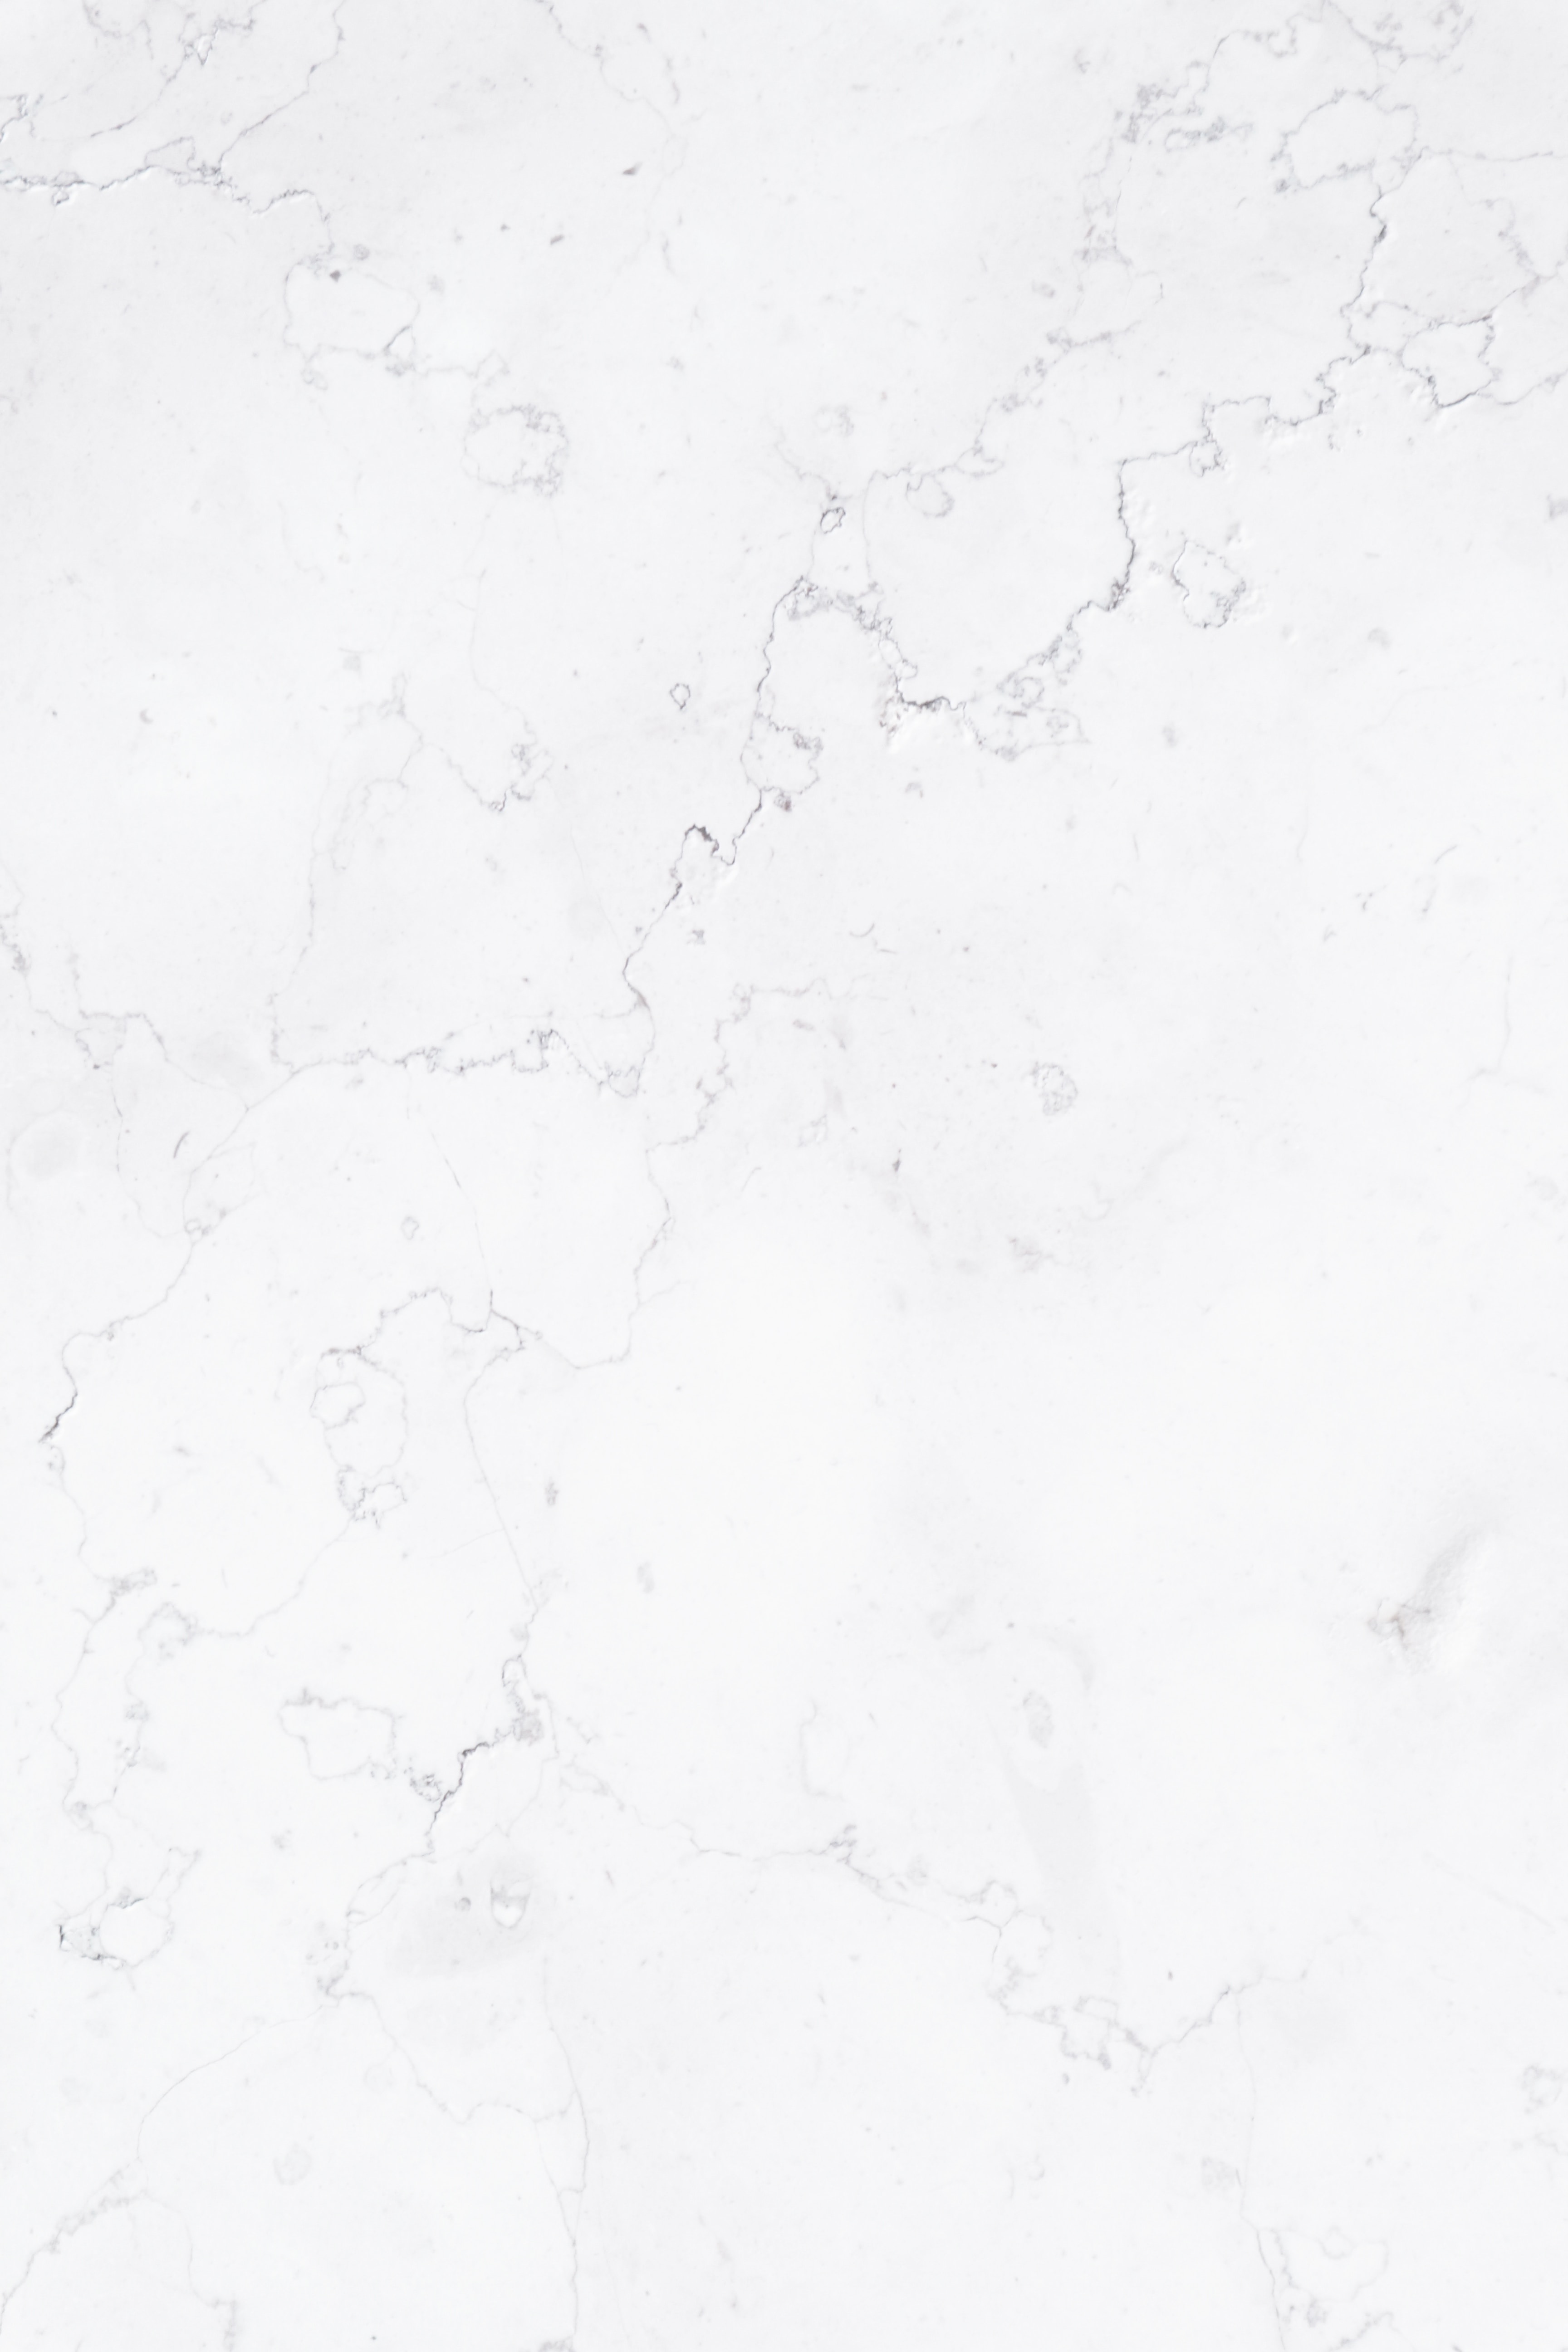 texture, white, textures, marble 4K Ultra